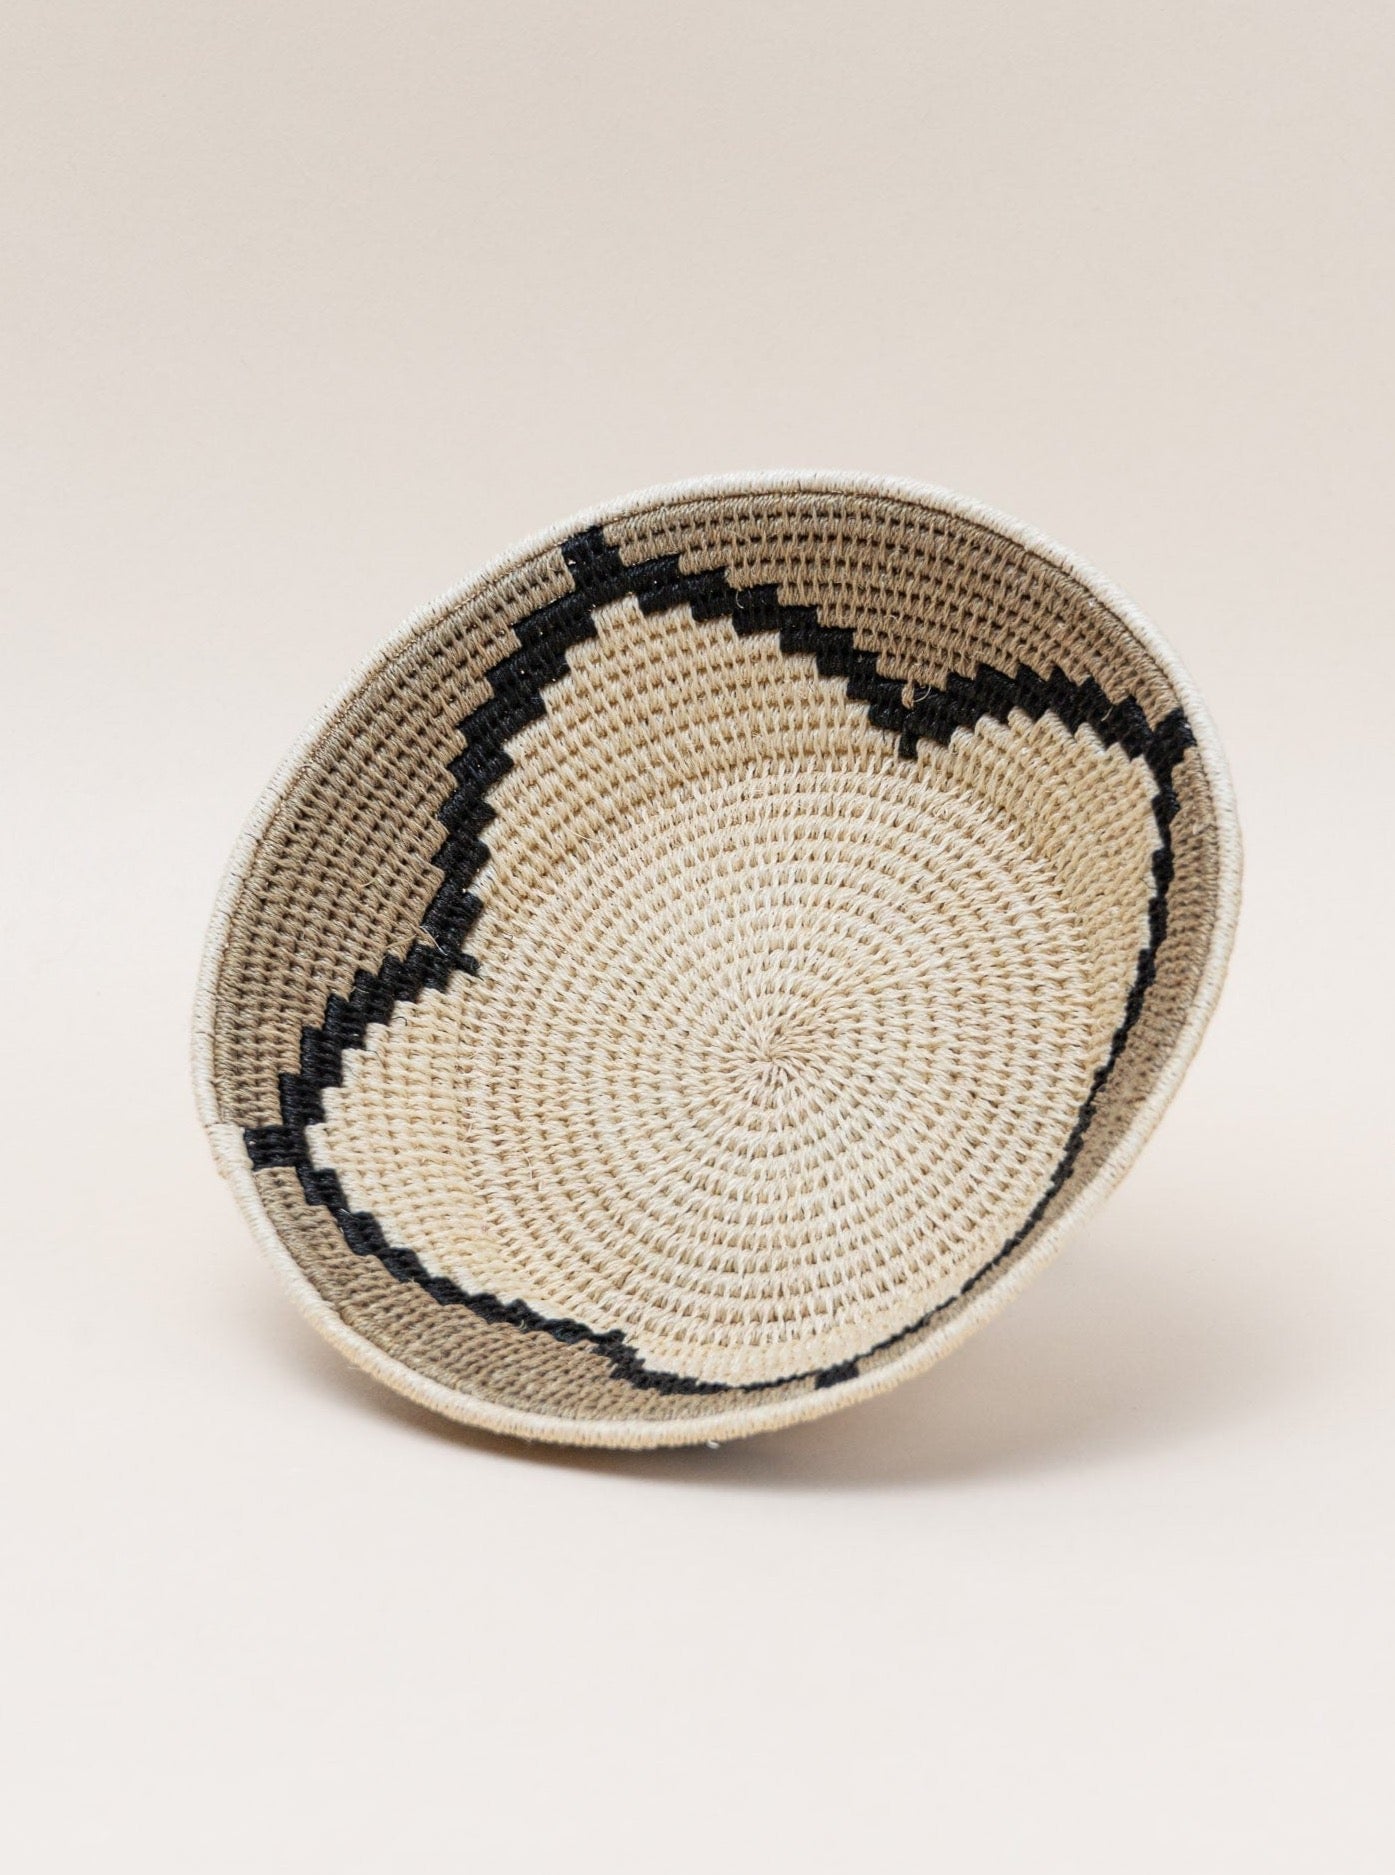 A Handmade Sisal Catchall Basket, showcasing Swazi weaving techniques, on a white surface.